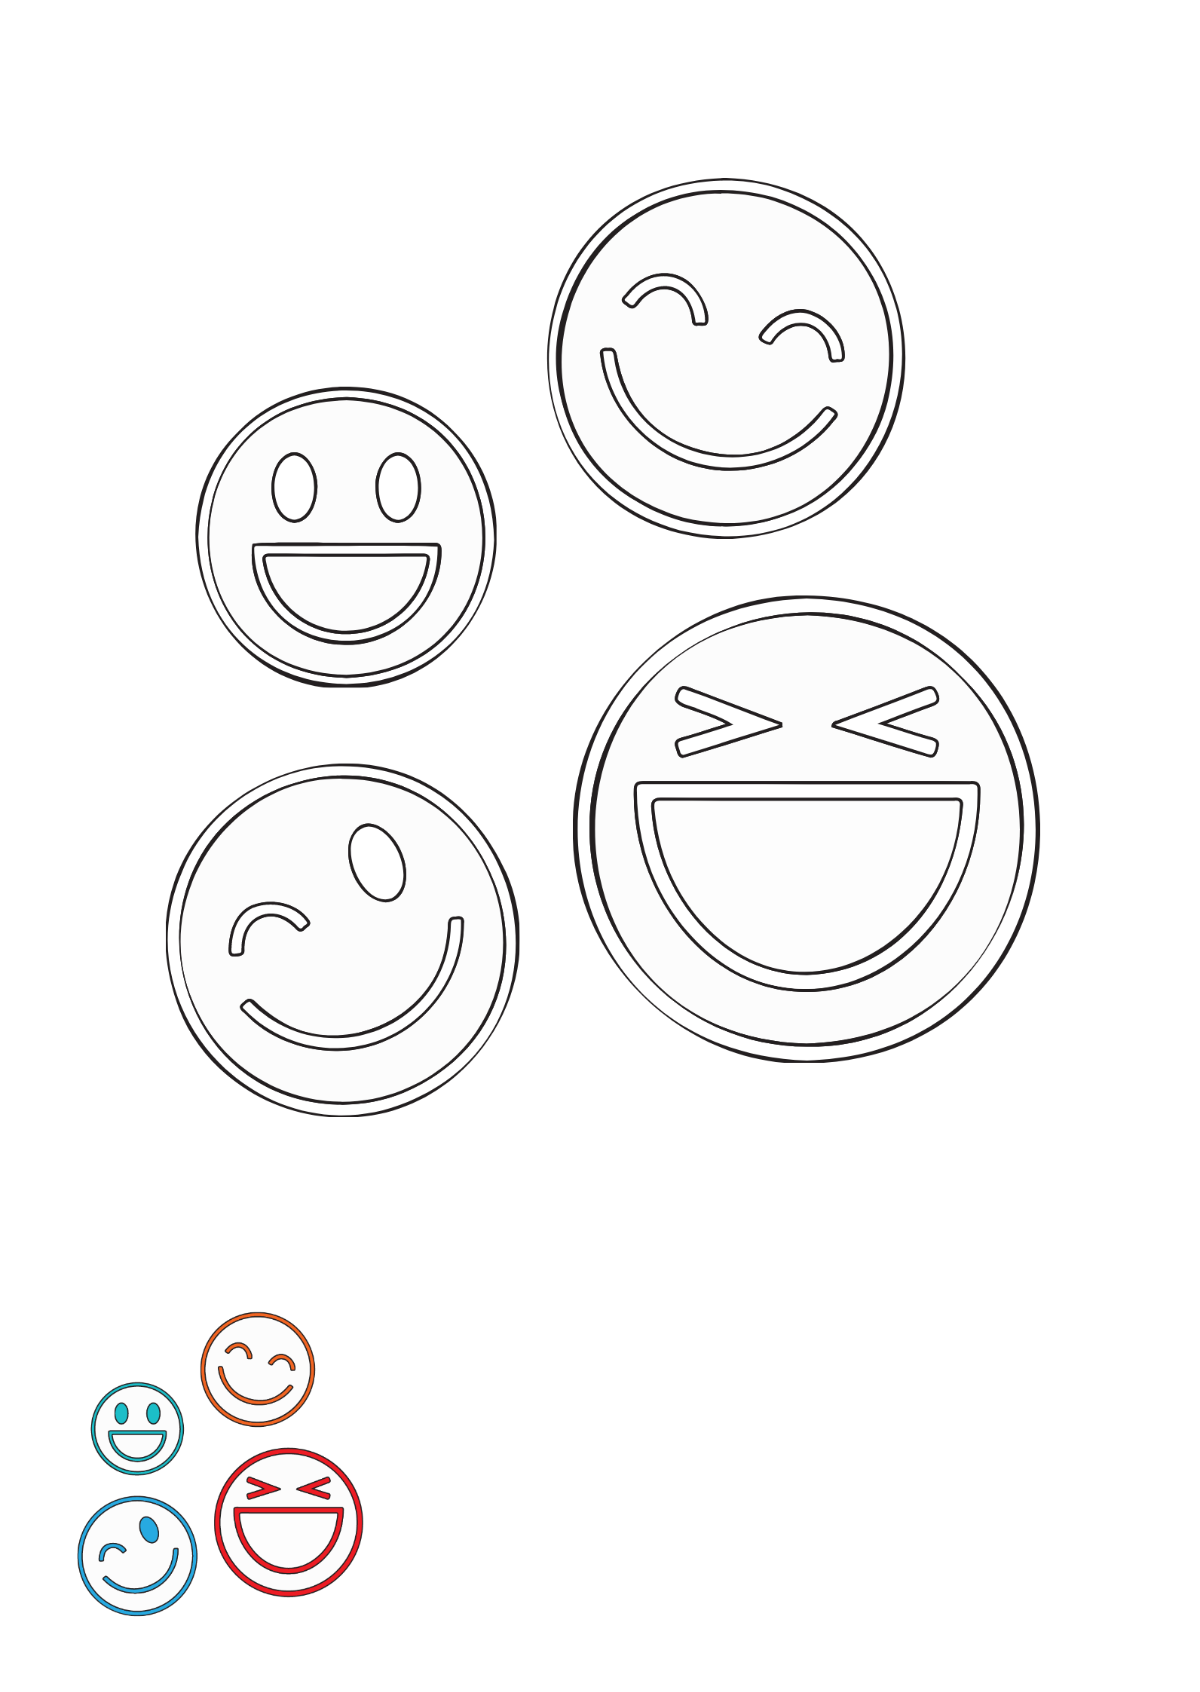 Smiley Outline coloring page Template